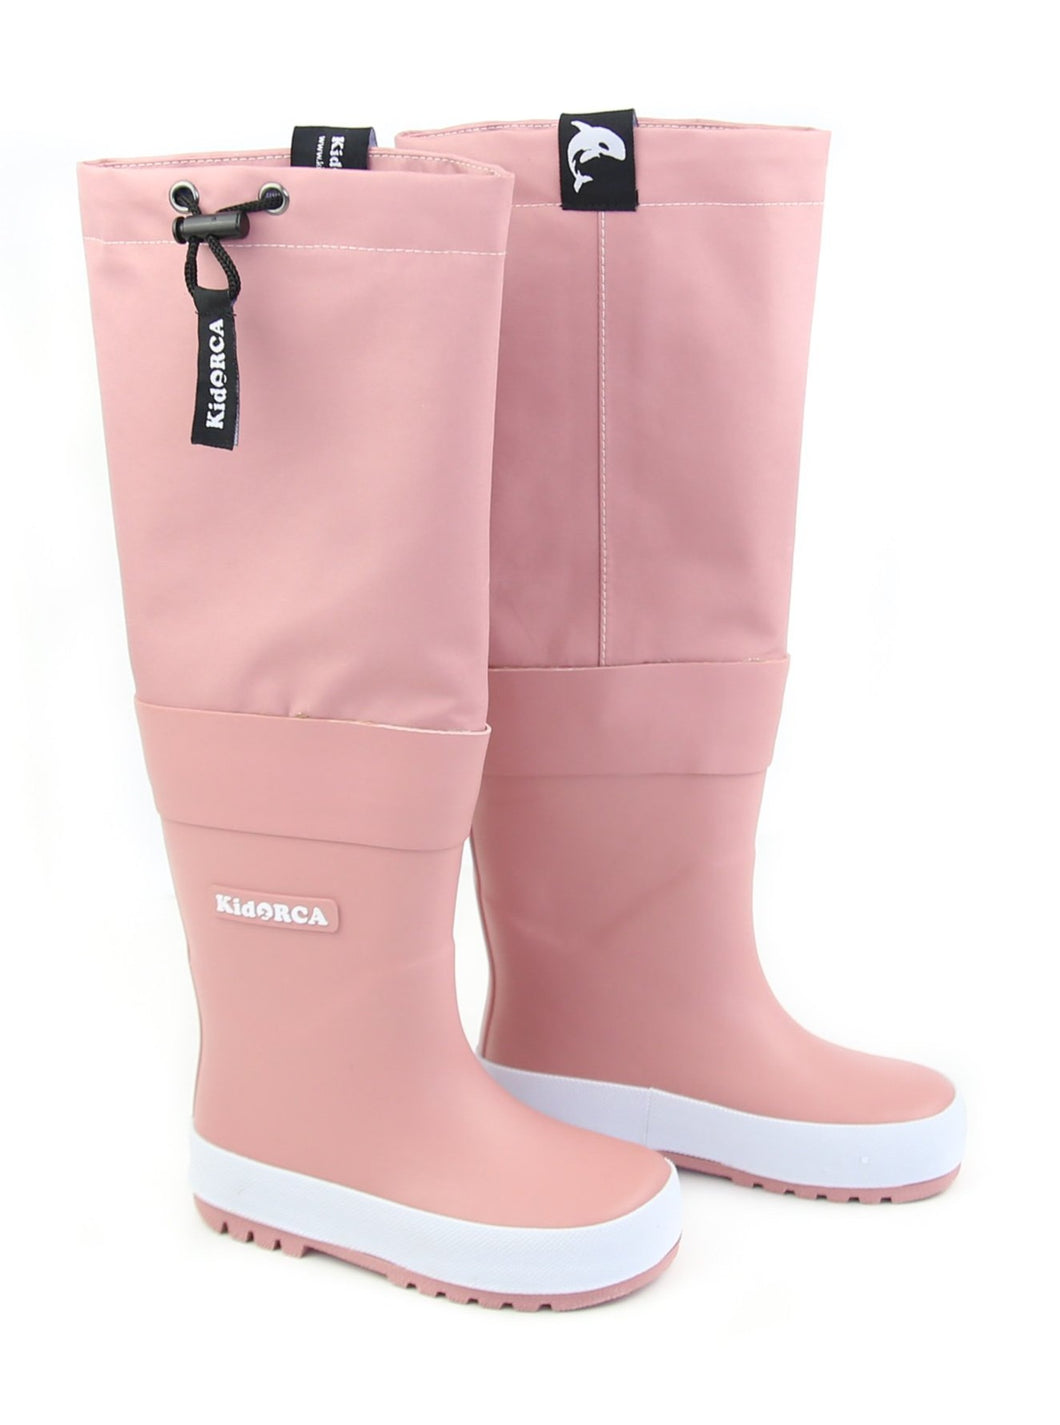 KidORCA Kids Rain Boots with Above Knee Waders _ Ash Rose